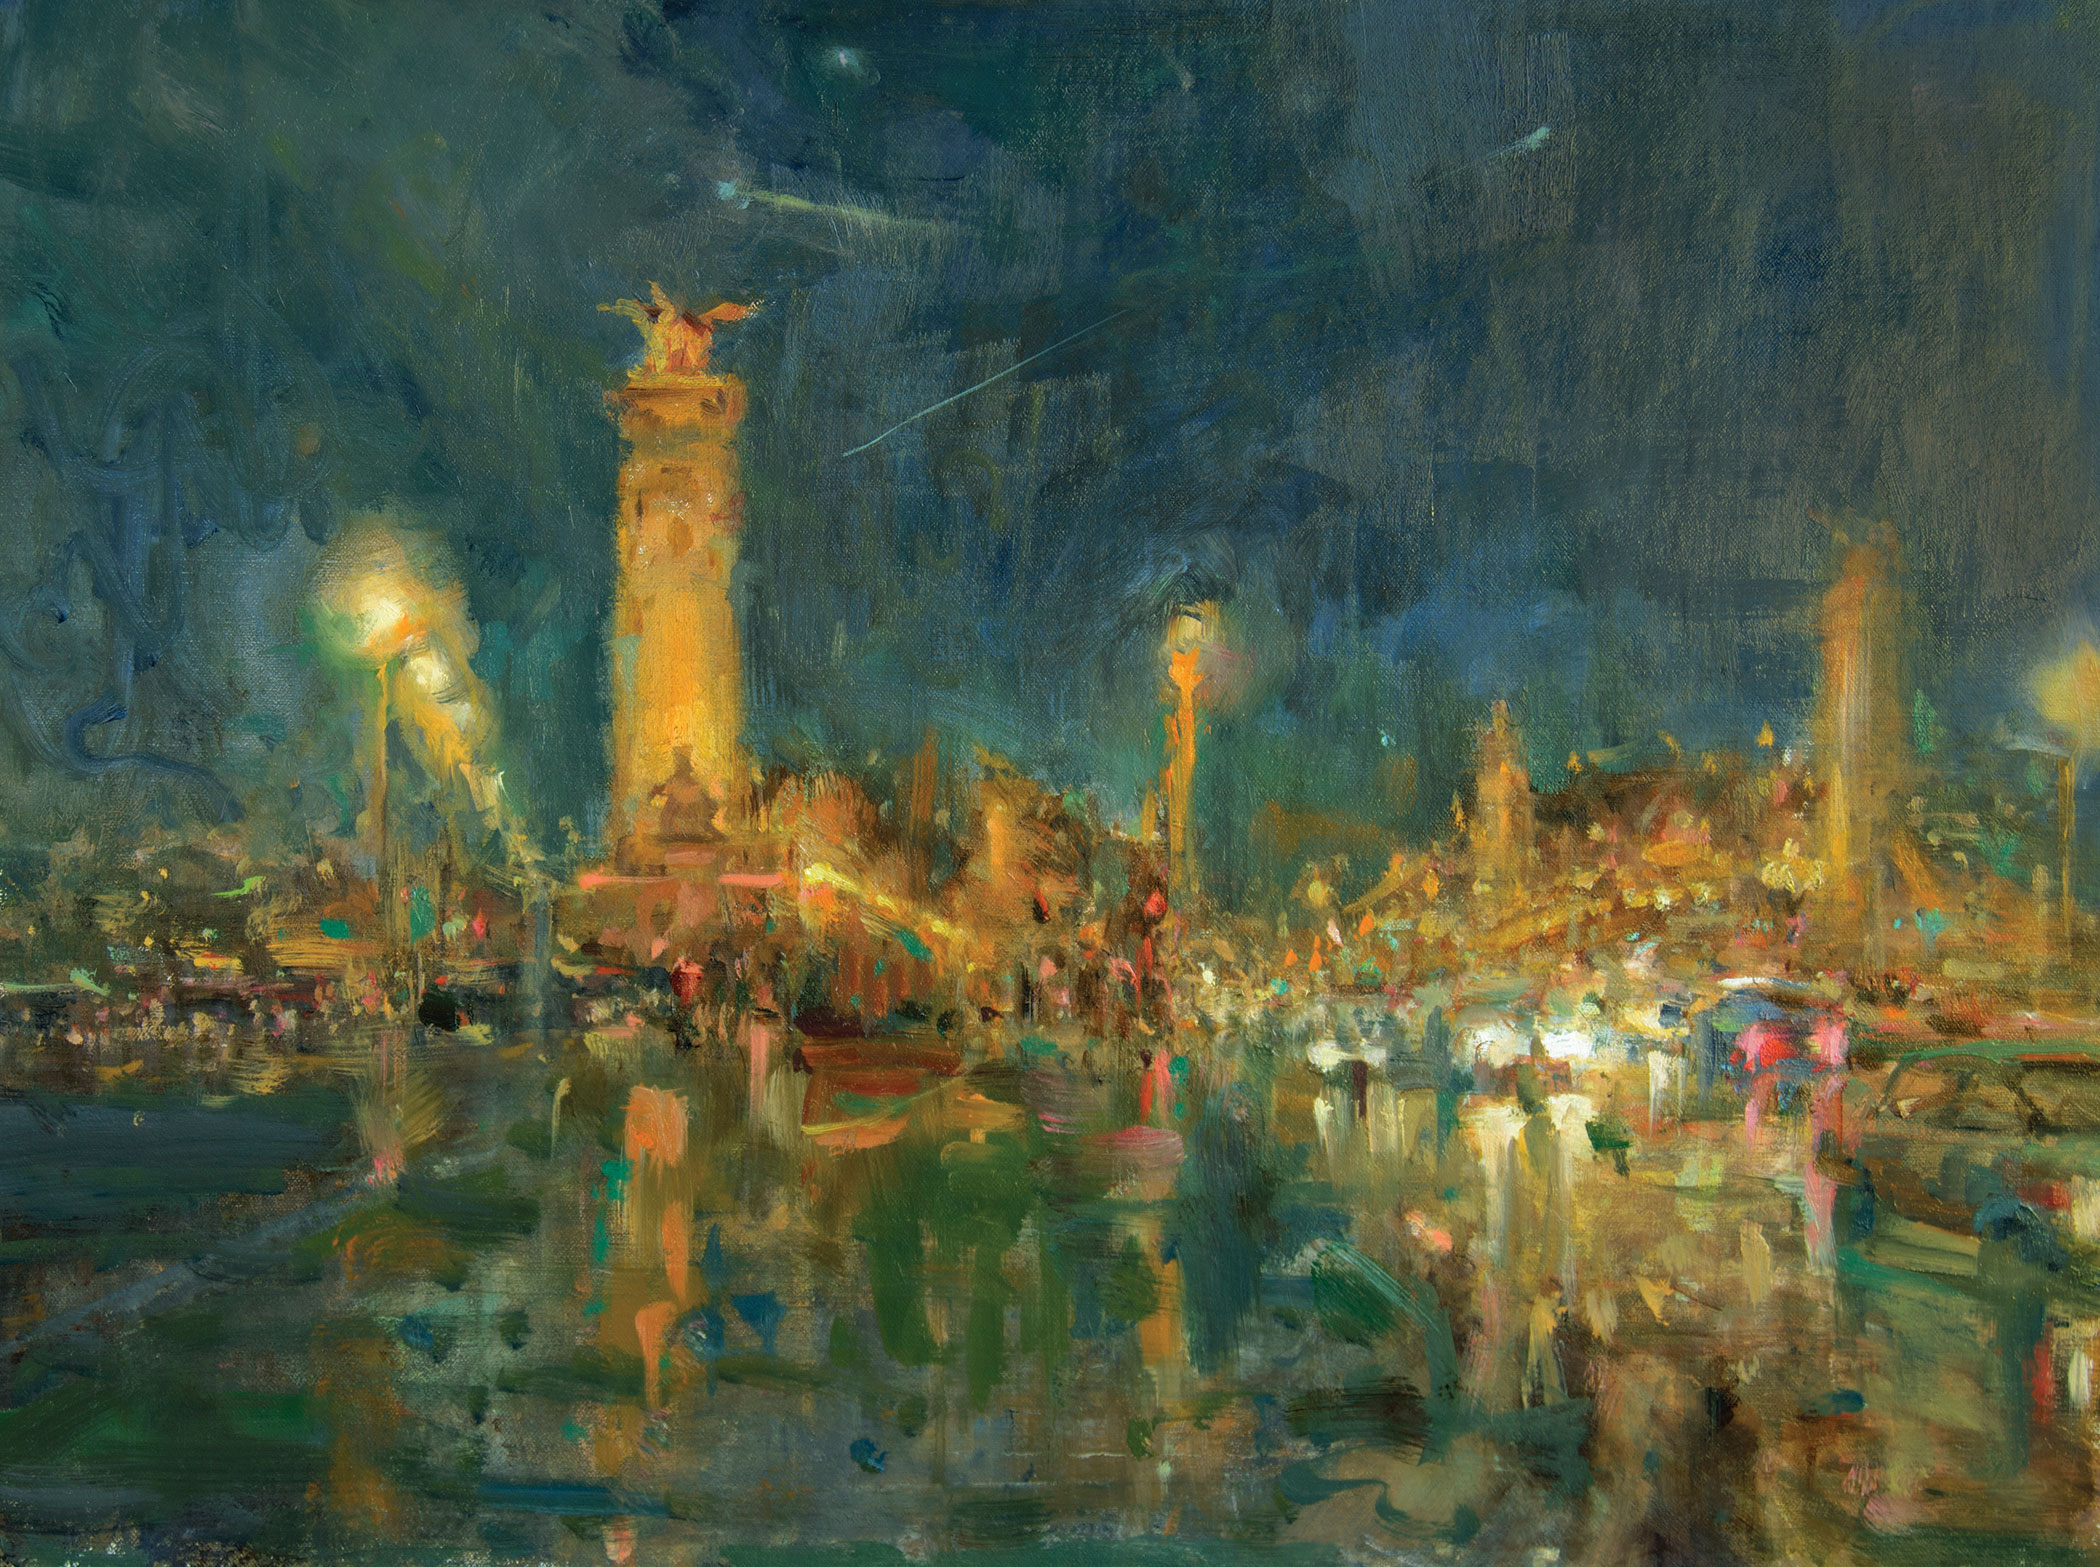 Nocturne painting of a city